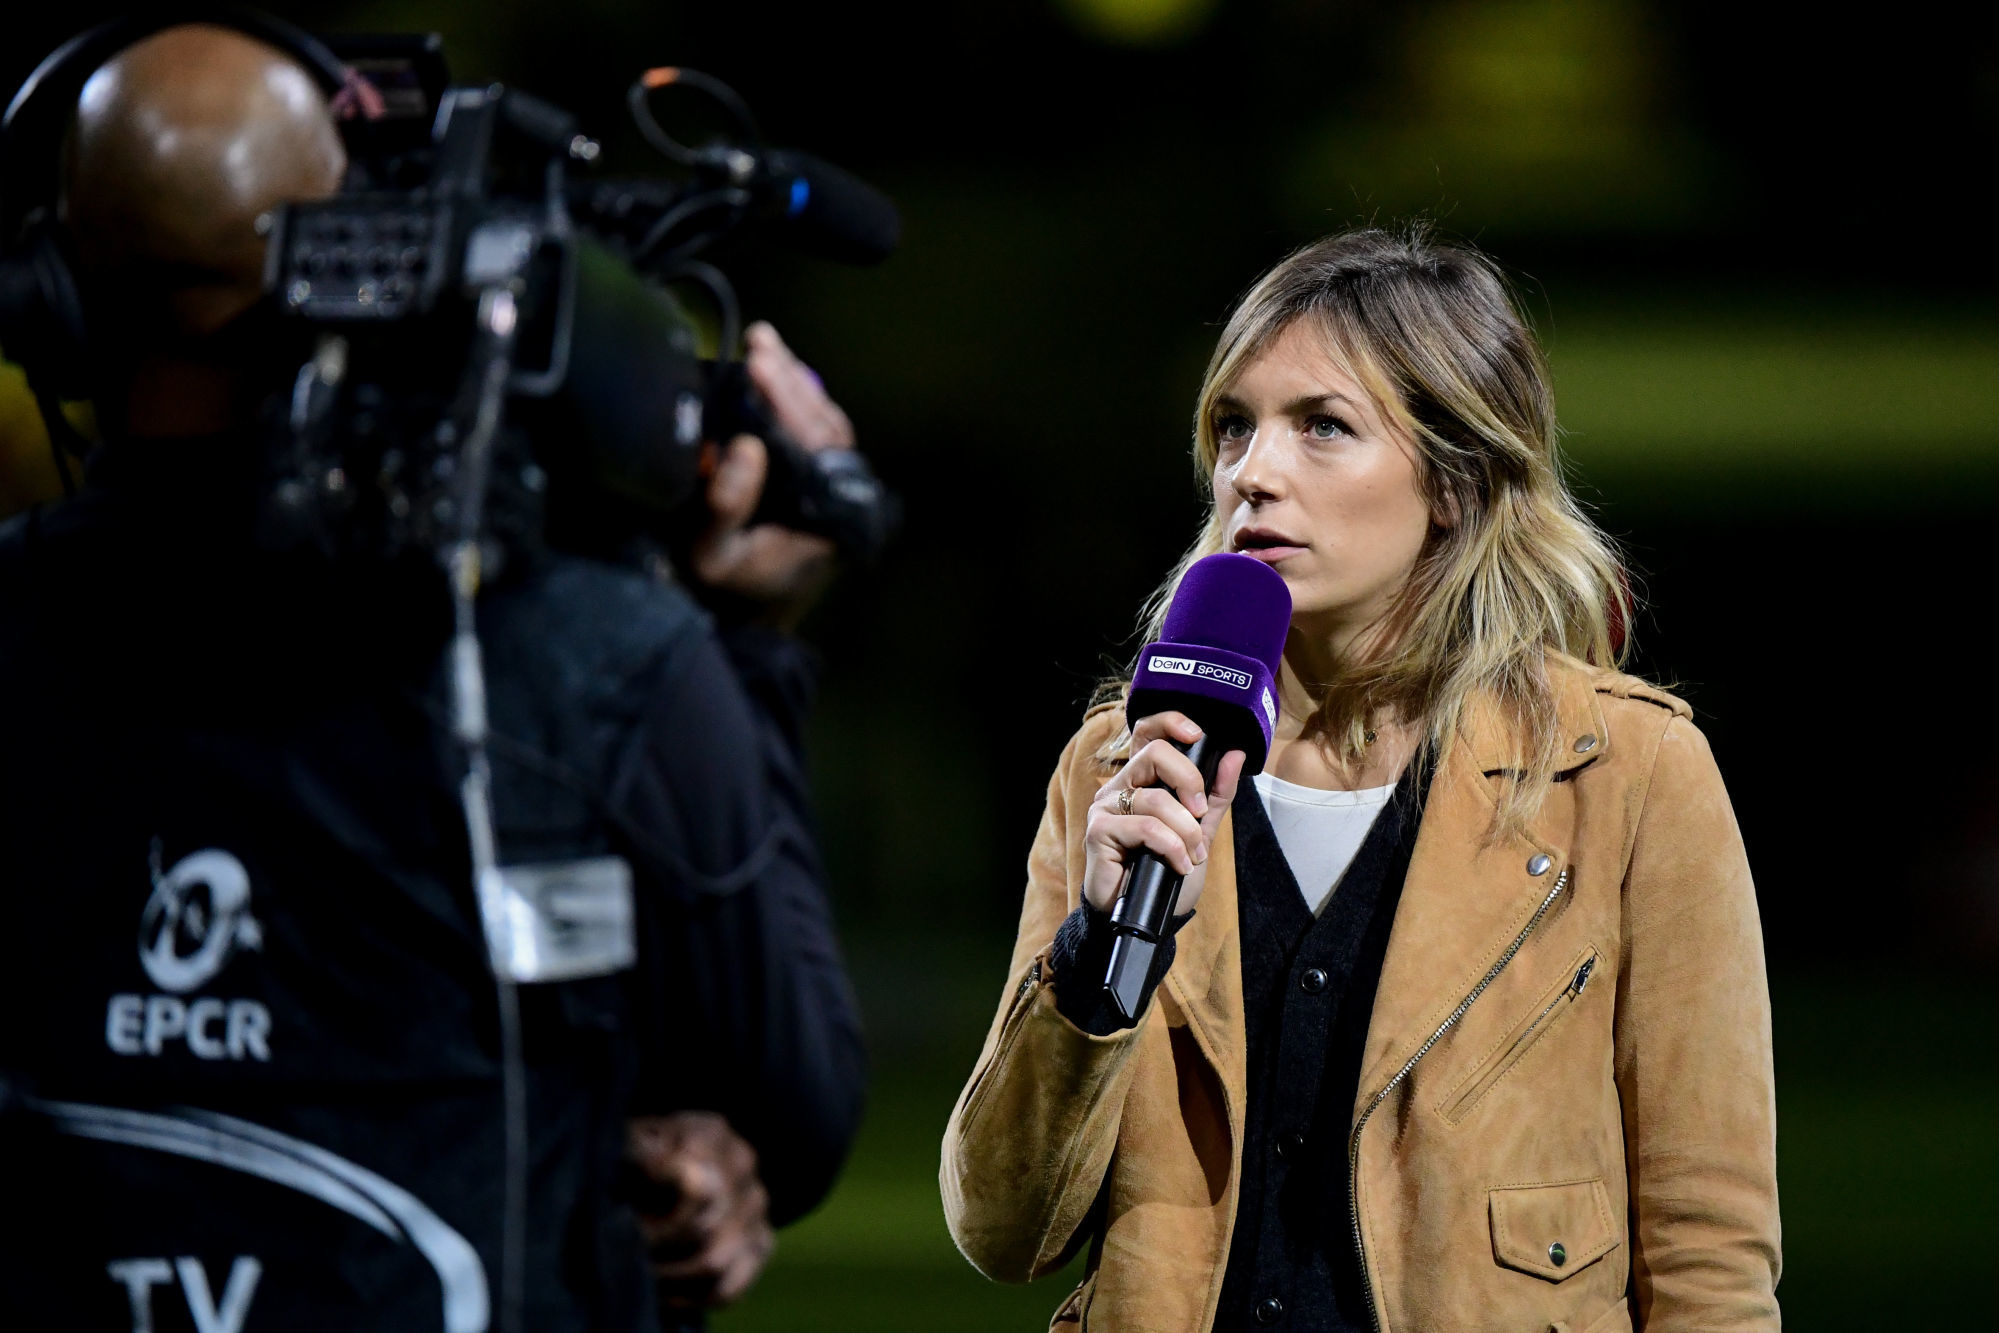 French tv journalist Clementine SARLAT during the European Rugby Champions Cup, Pool 4 match between Racing 92 and Ospreys on December 13, 2019 in Nanterre, France. (Photo by Dave Winter/Icon Sport) - Clementine SARLAT - Paris La Defense Arena - Paris (France)